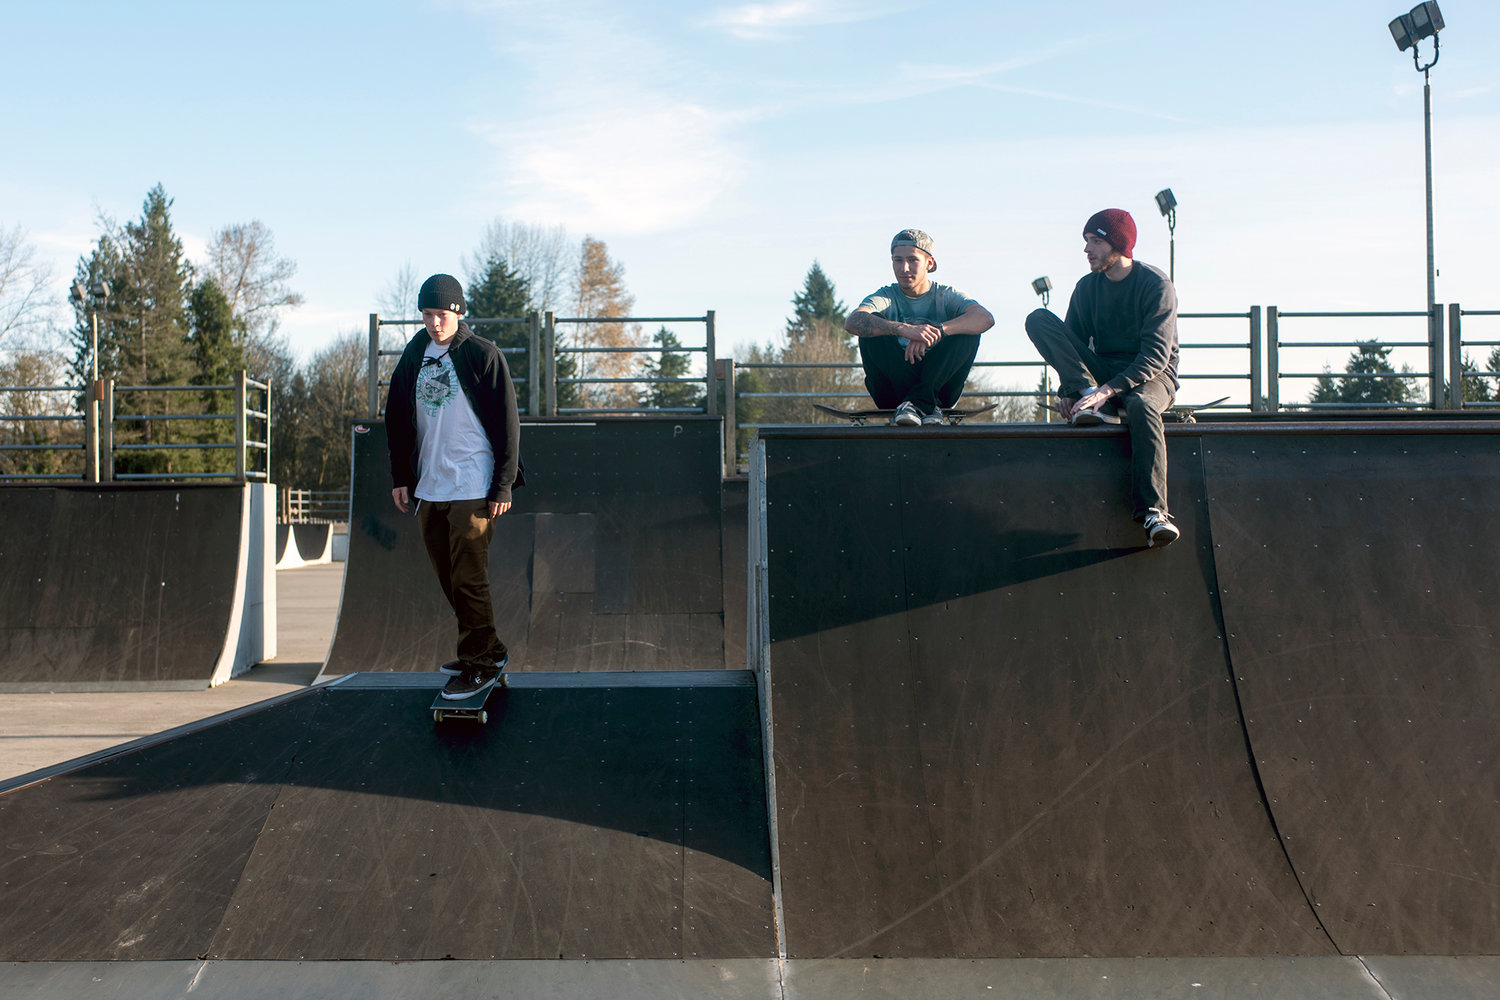 Greg DeHart skates over a ramp at Riverside Skate Park as his friends look on in November 2014. The city of Centralia is planning improvements for the park.